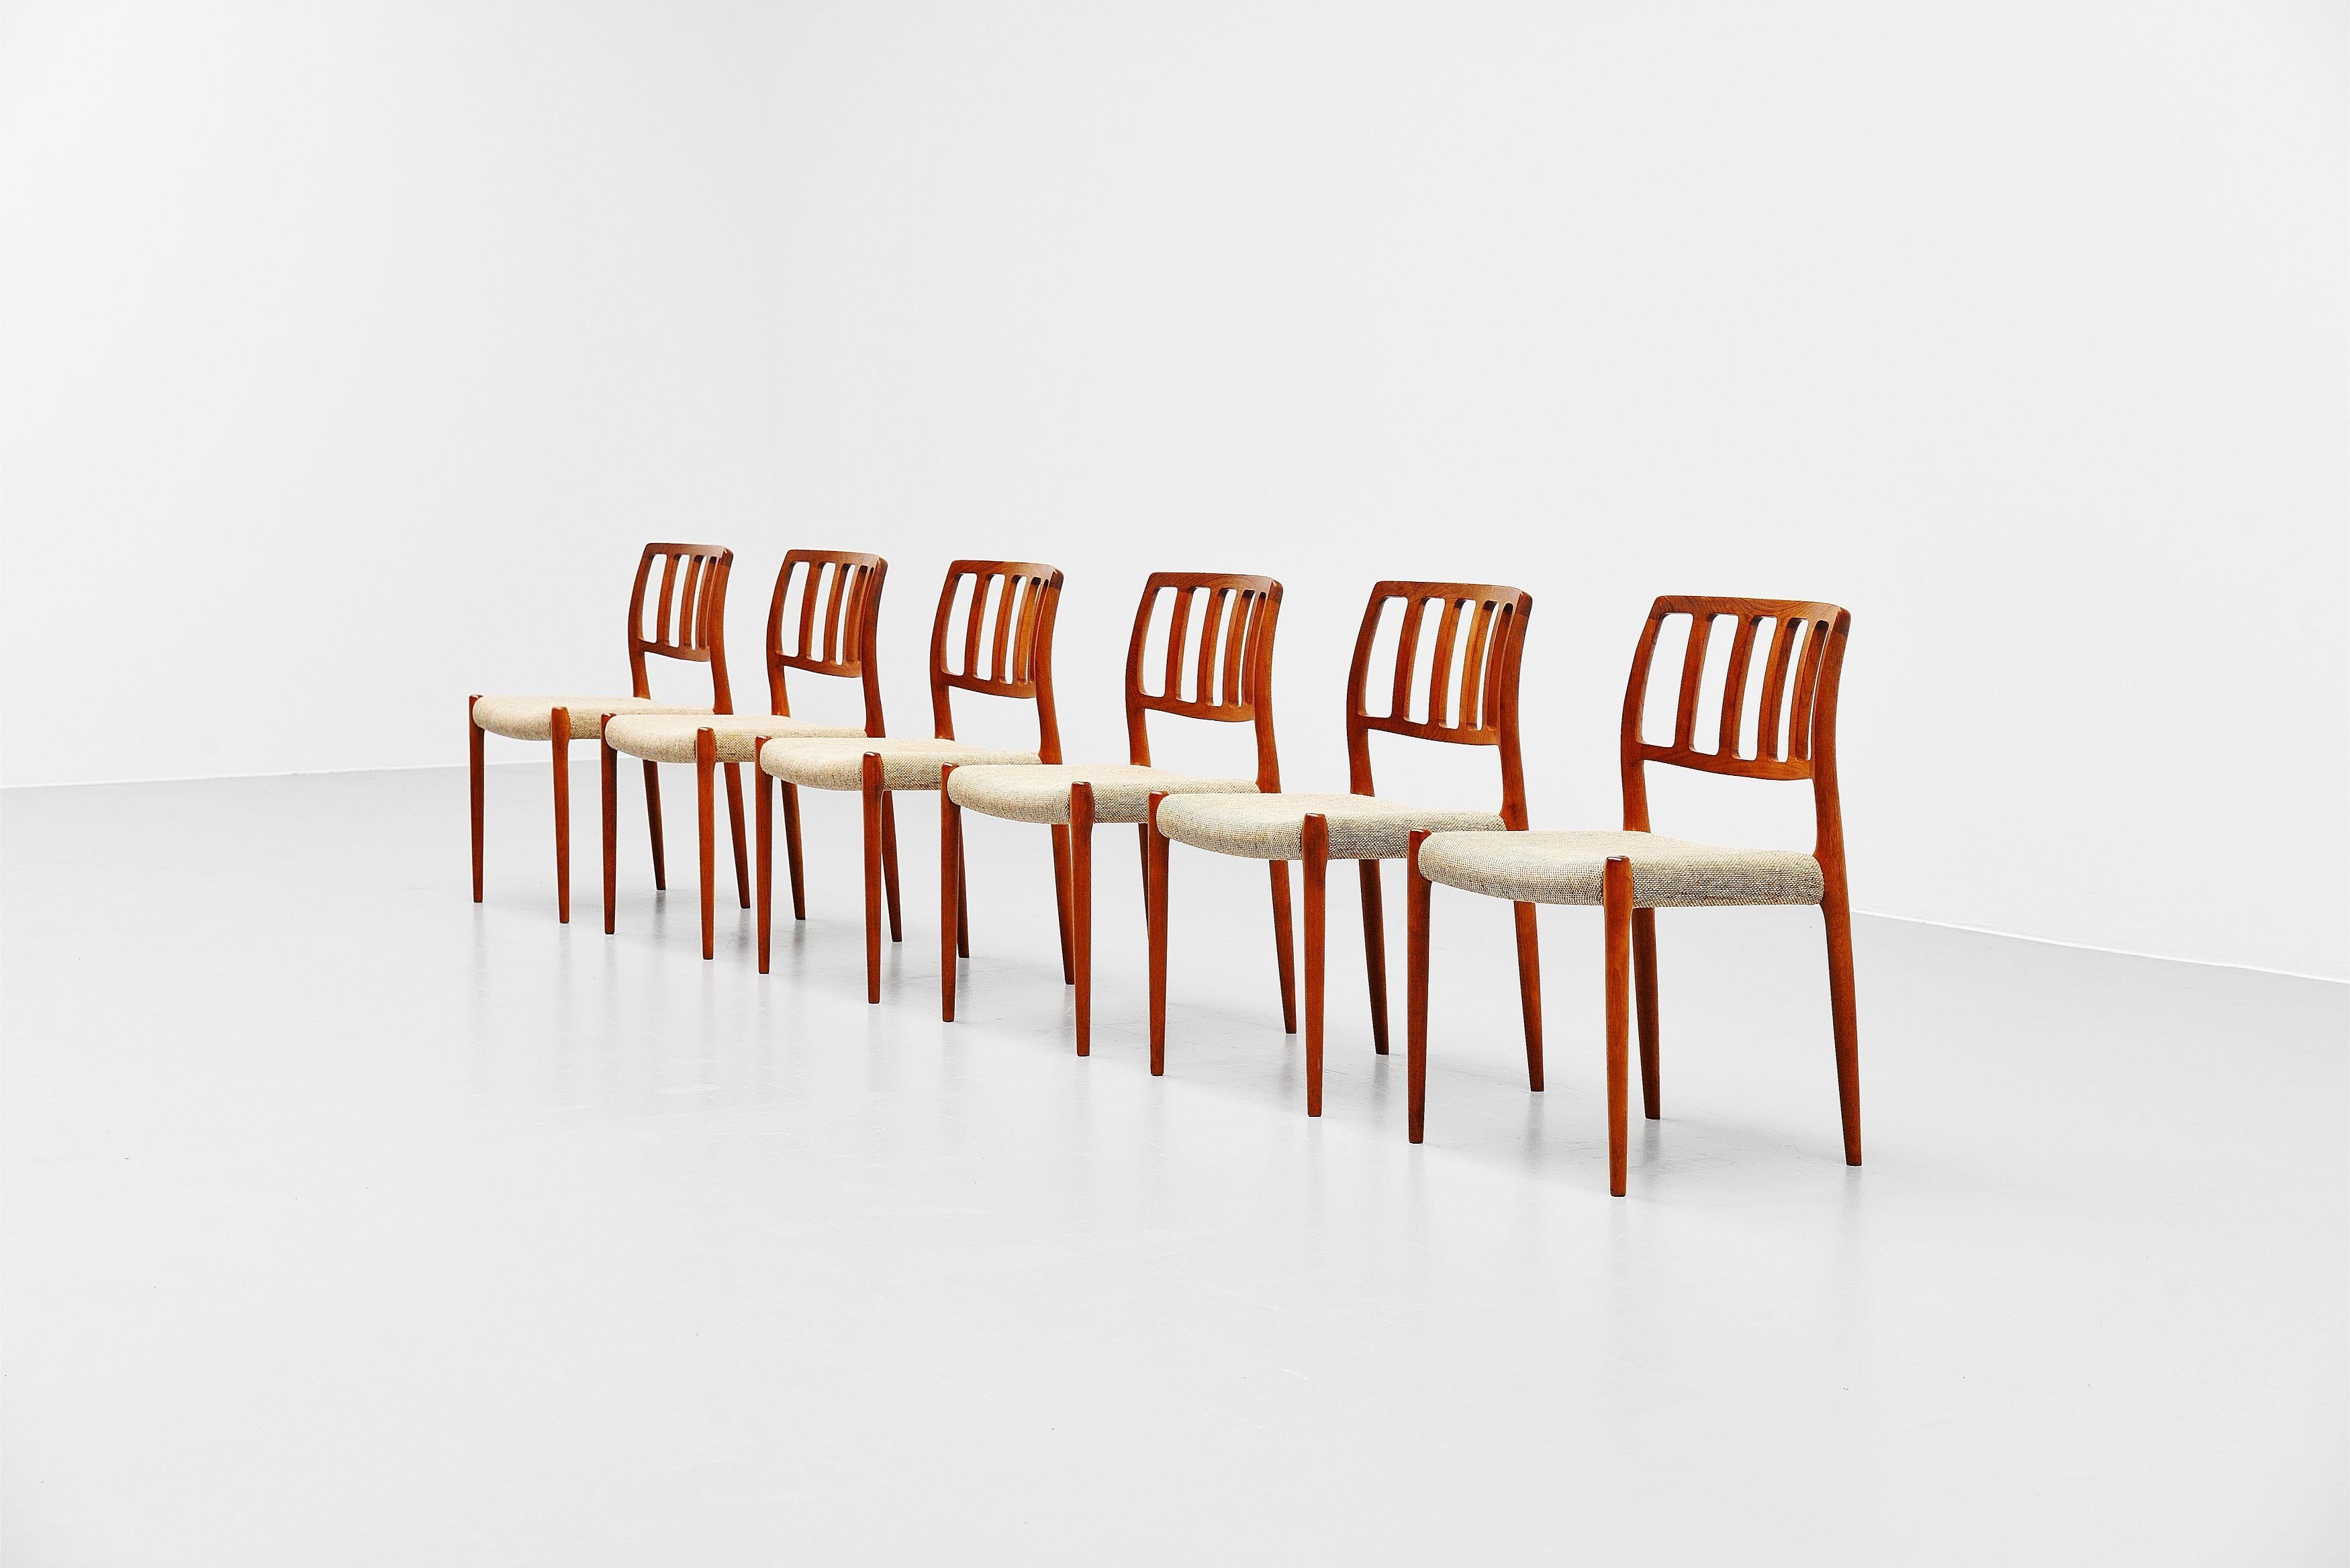 Very nice and elegant set of dining chairs model 83 designed by Niels Moller and manufactured by J.L. Moller Mobelfabrik, Denmark 1974. The chairs have a solid teak wooden frame and original beige upholstery which is advised to be changed. The